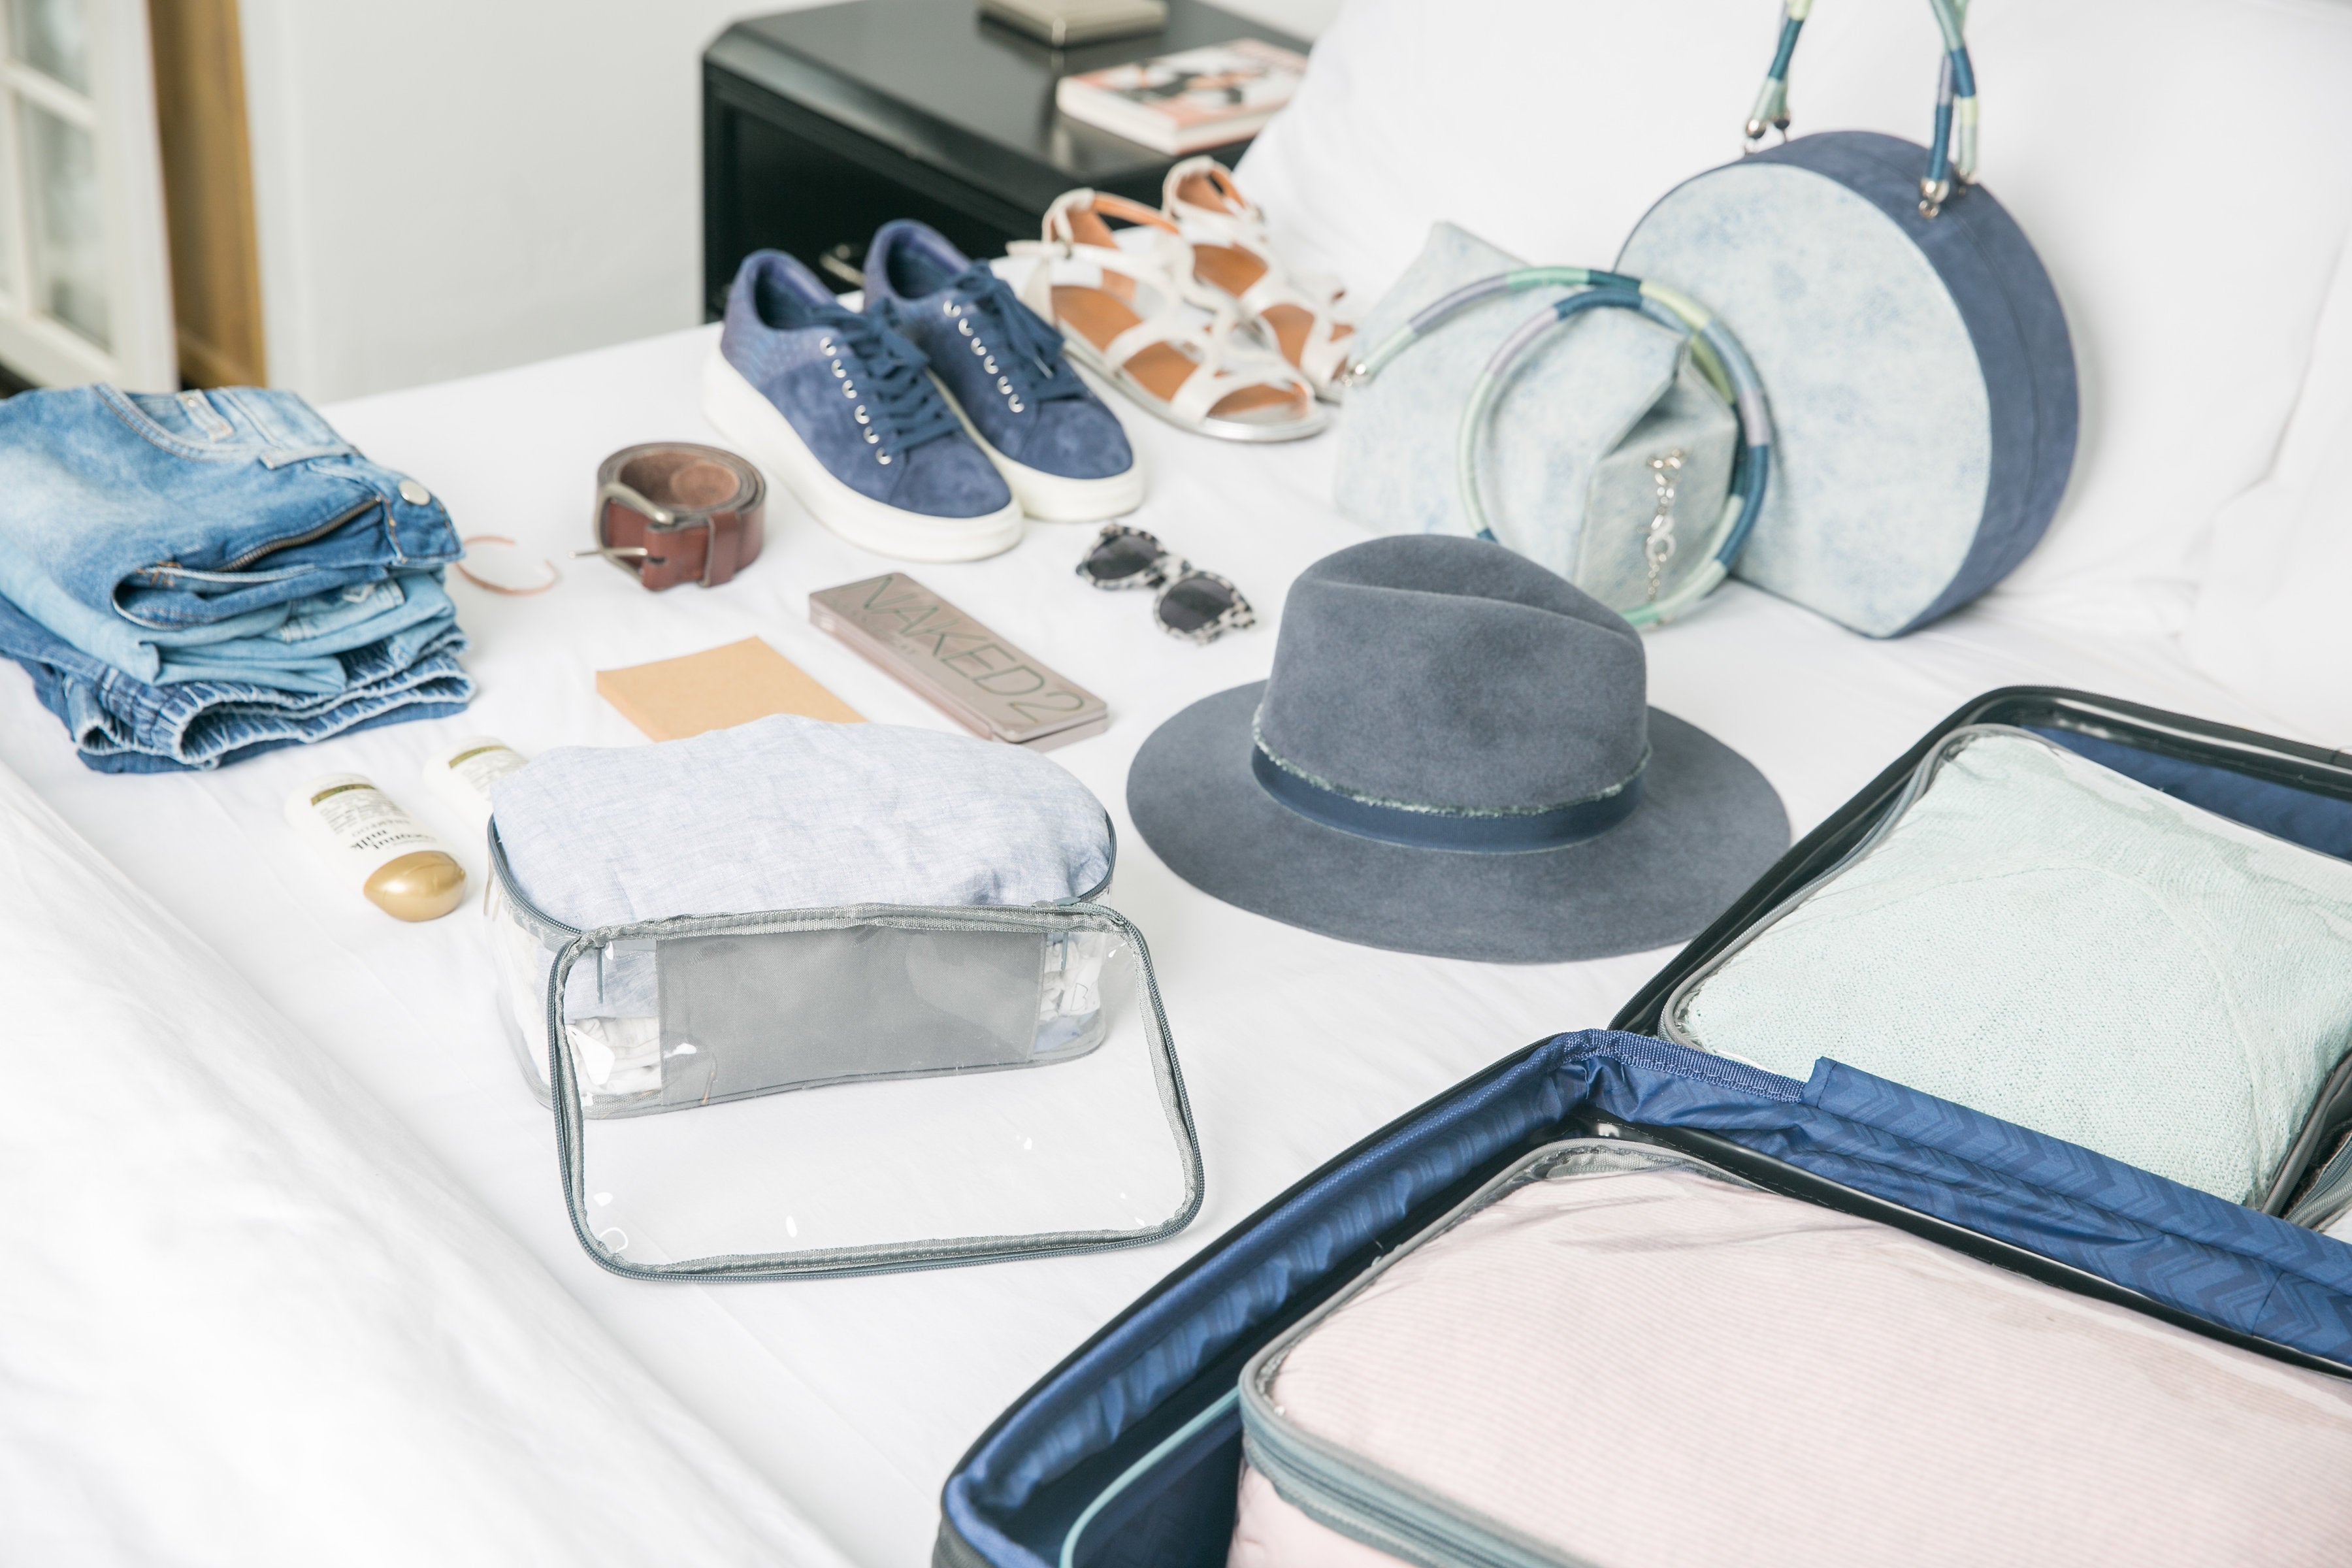 Shoes and other travel essentials